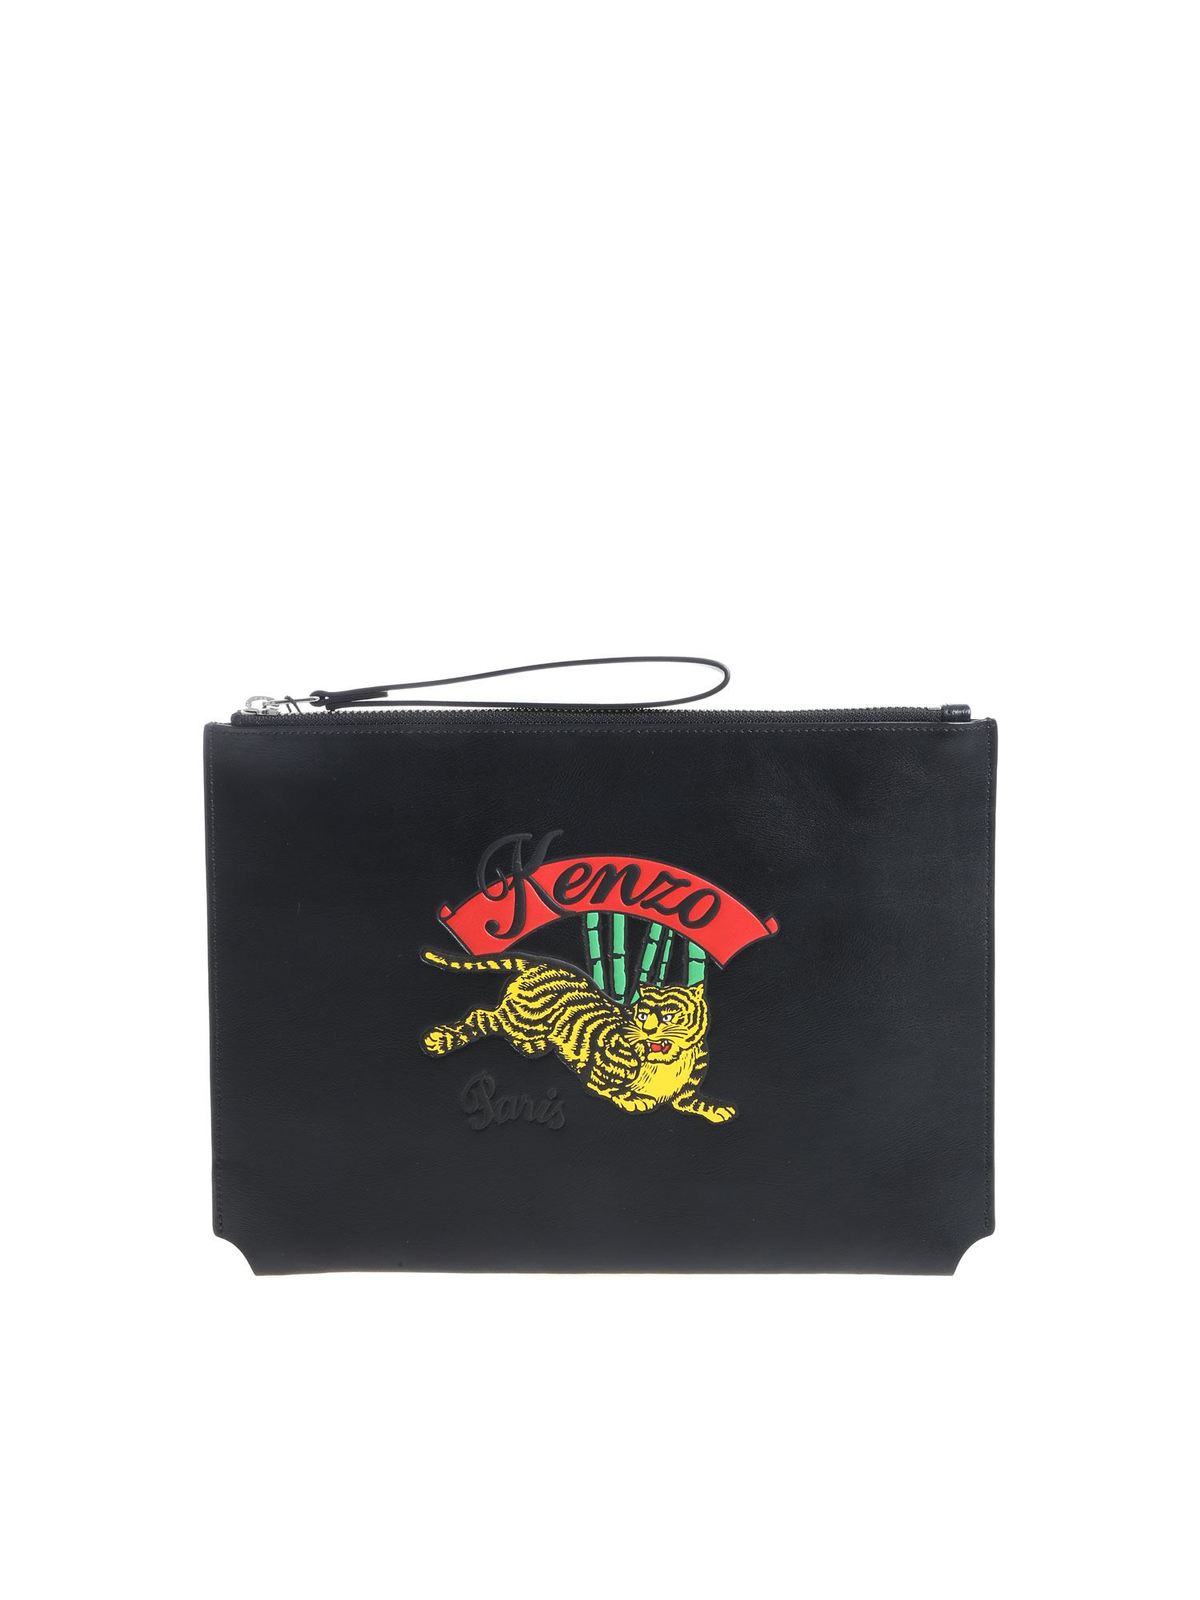 KENZO JUMPING TIGER BLACK LEATHER CLUTCH